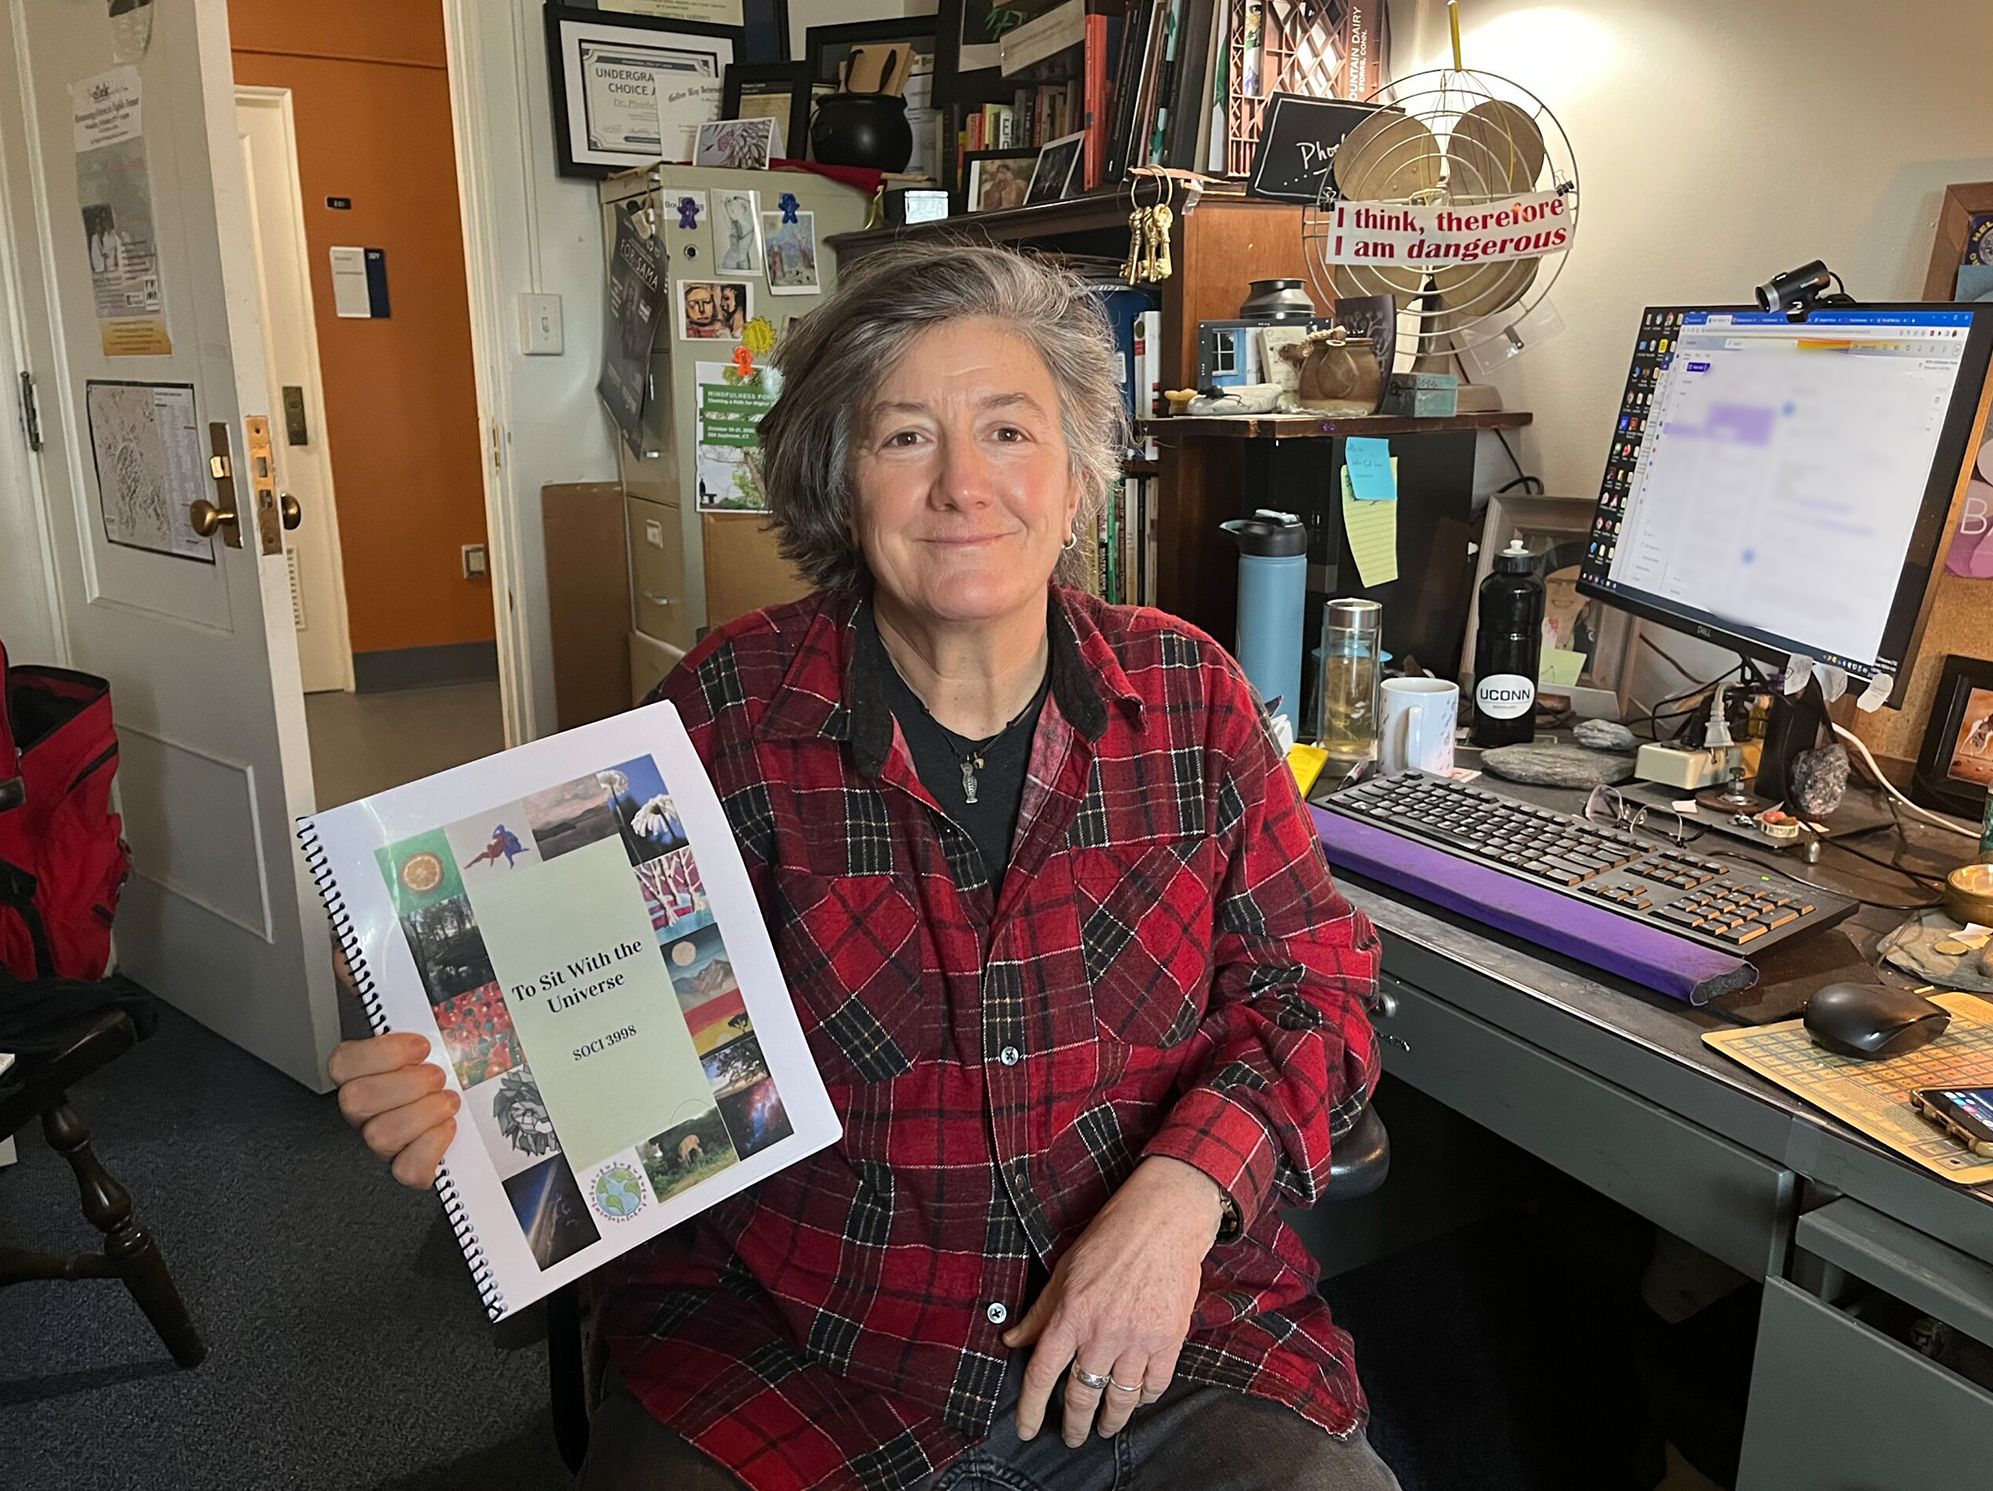 Sociology professor Phoebe Godfrey with the book created by her students.